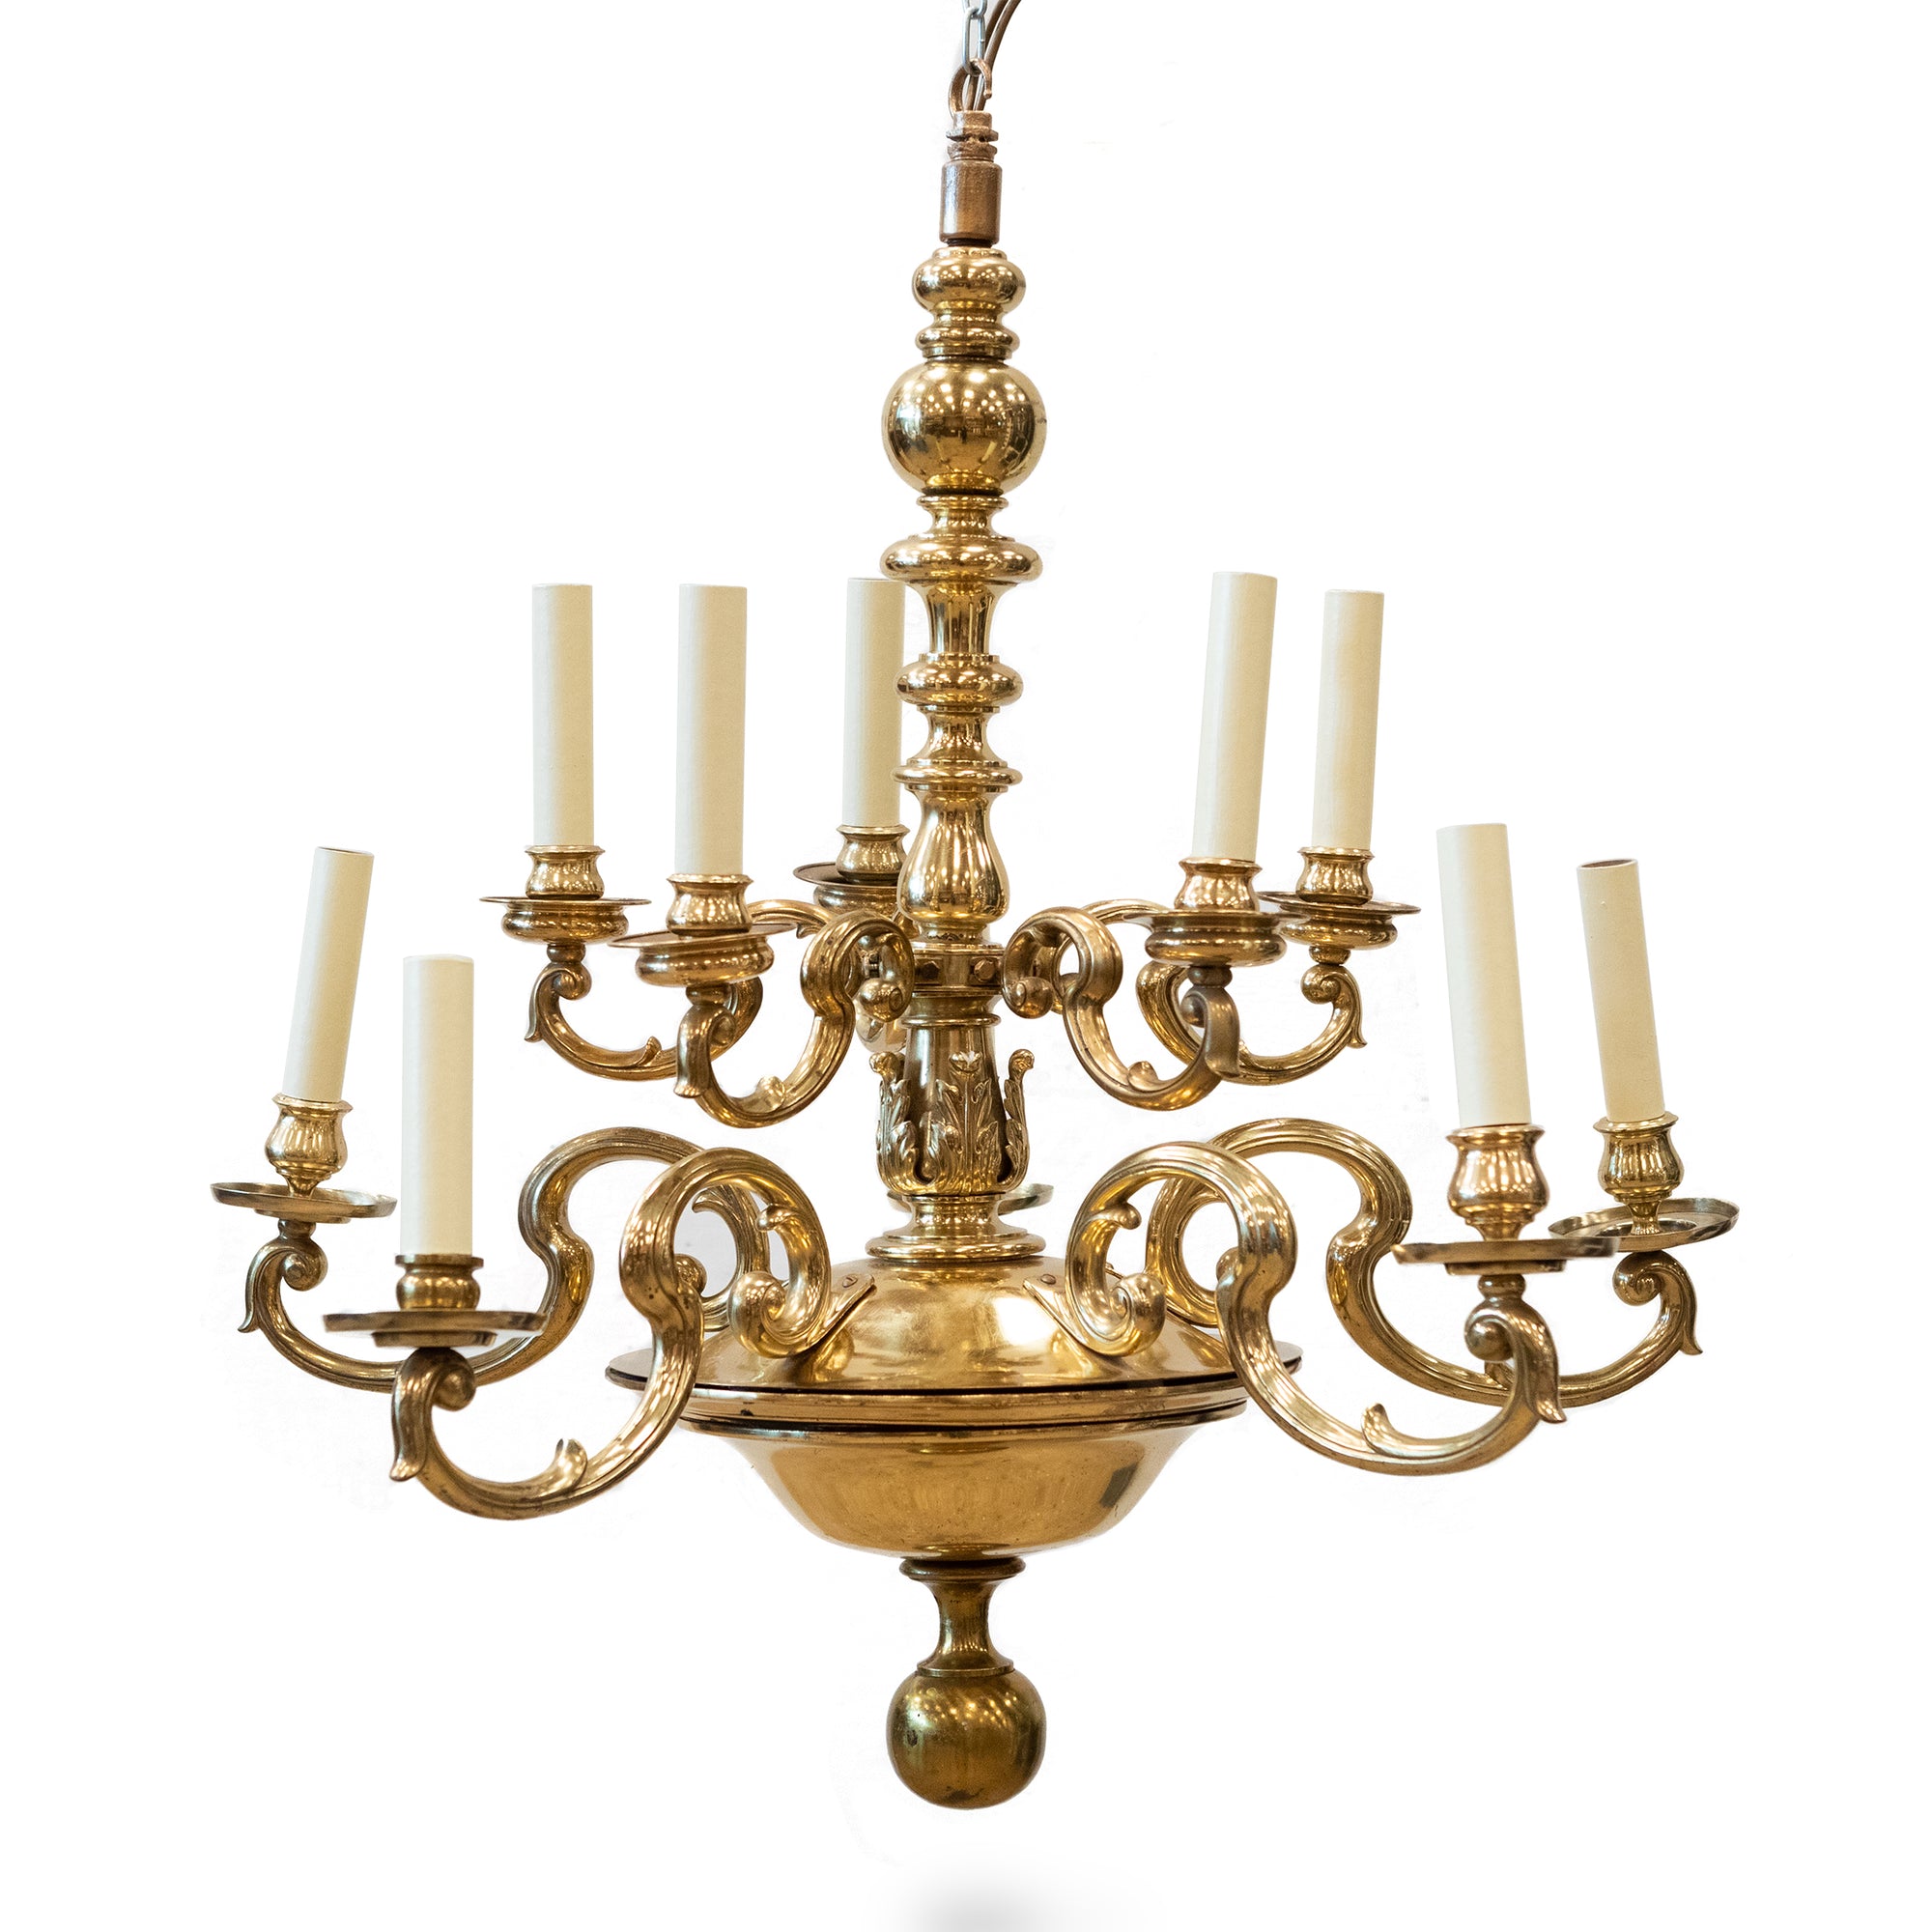 Reclaimed Dutch Style 2 Tier Brass Chandelier | 10 Arms | The Architectural Forum